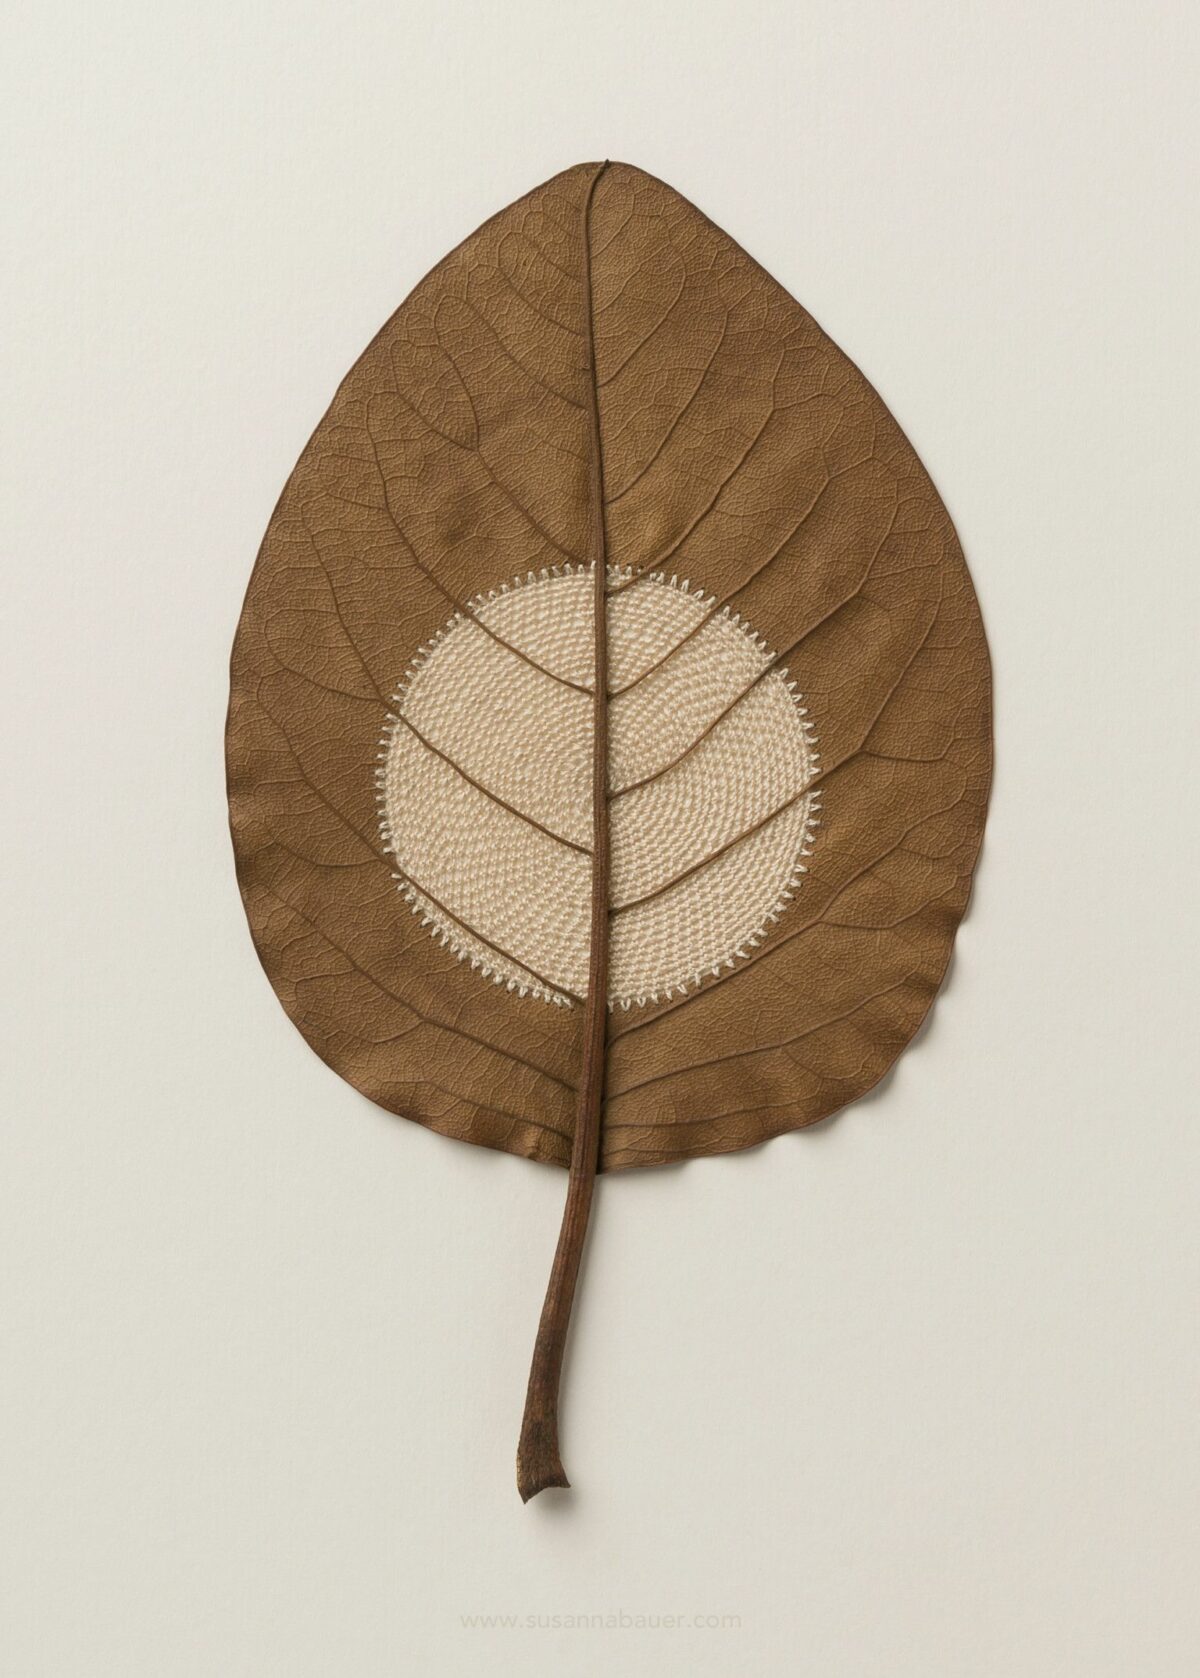 Beautiful Sculptures Of Dried Leaves Crocheted Delicate Patterns By Susanna Bauer 25